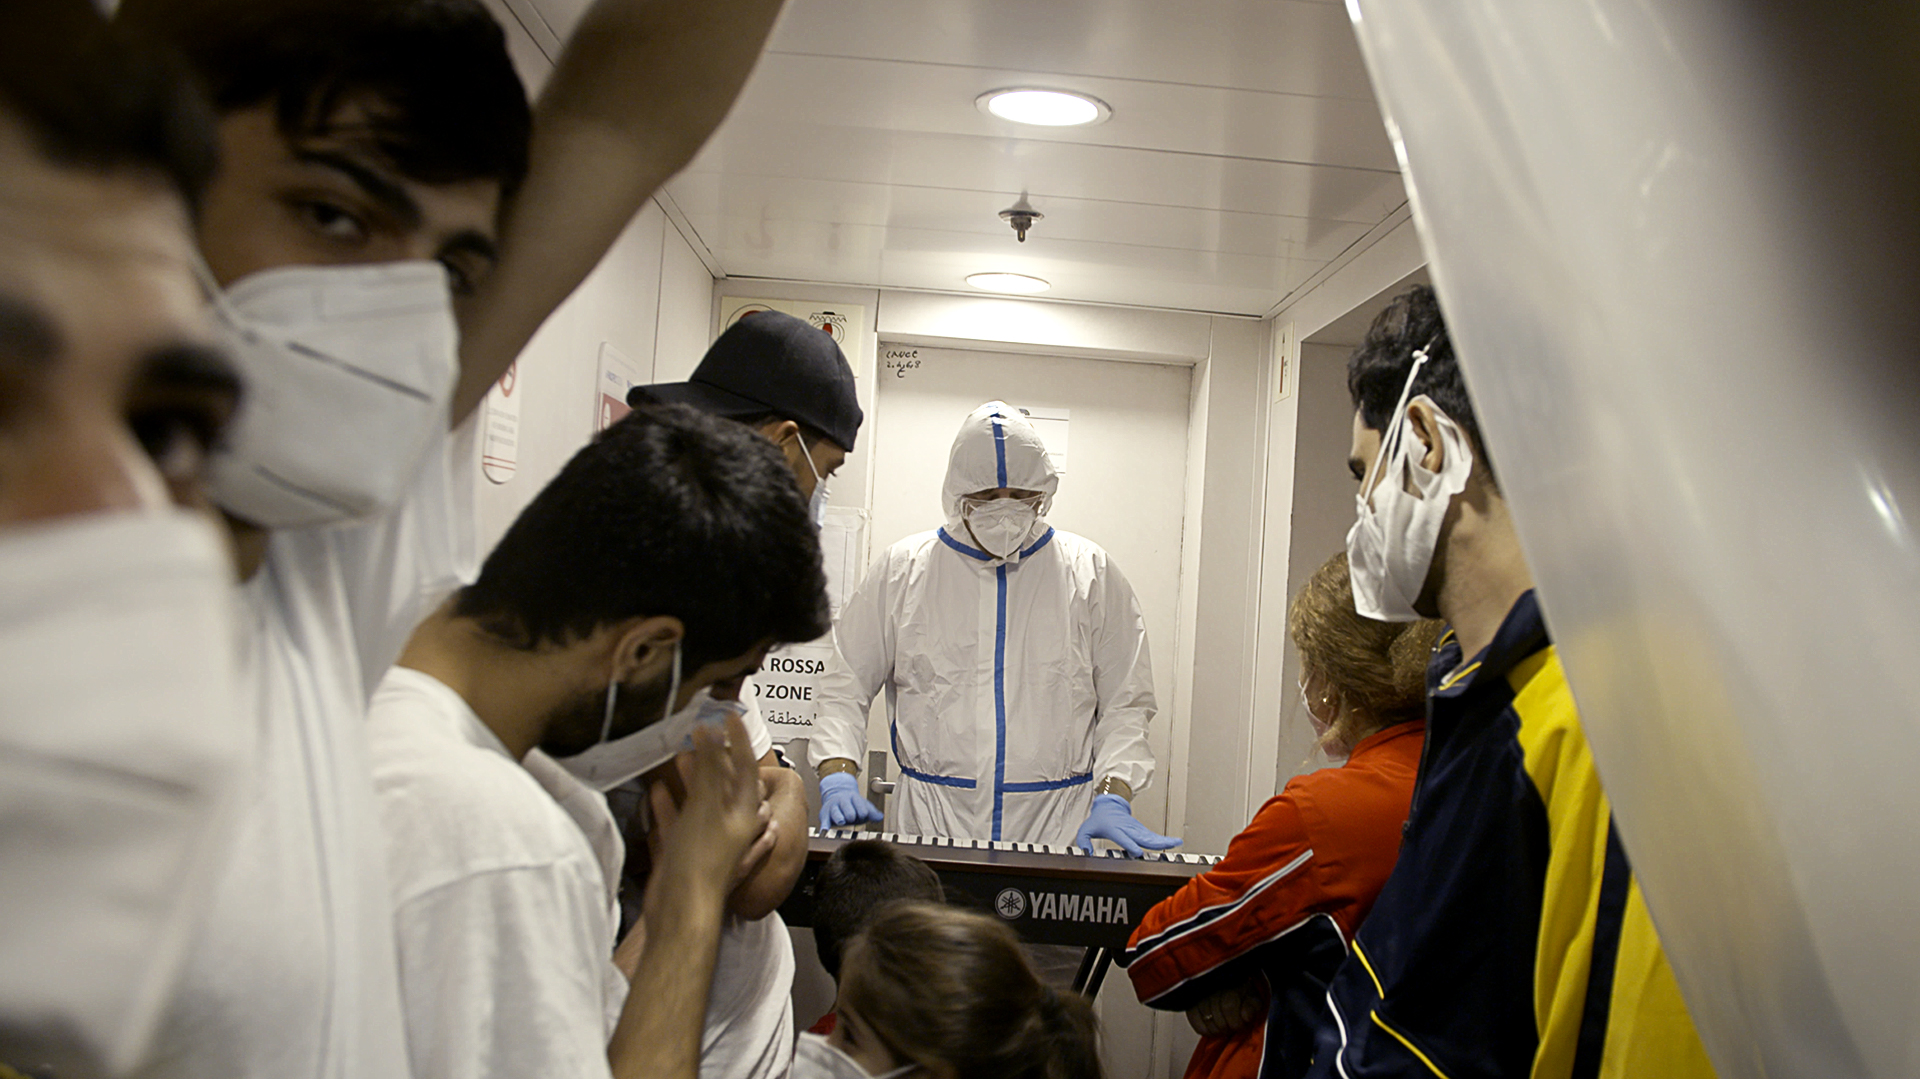 Onboard a cruise ship repurposed to quarantine migrants rescued from the Mediterranean